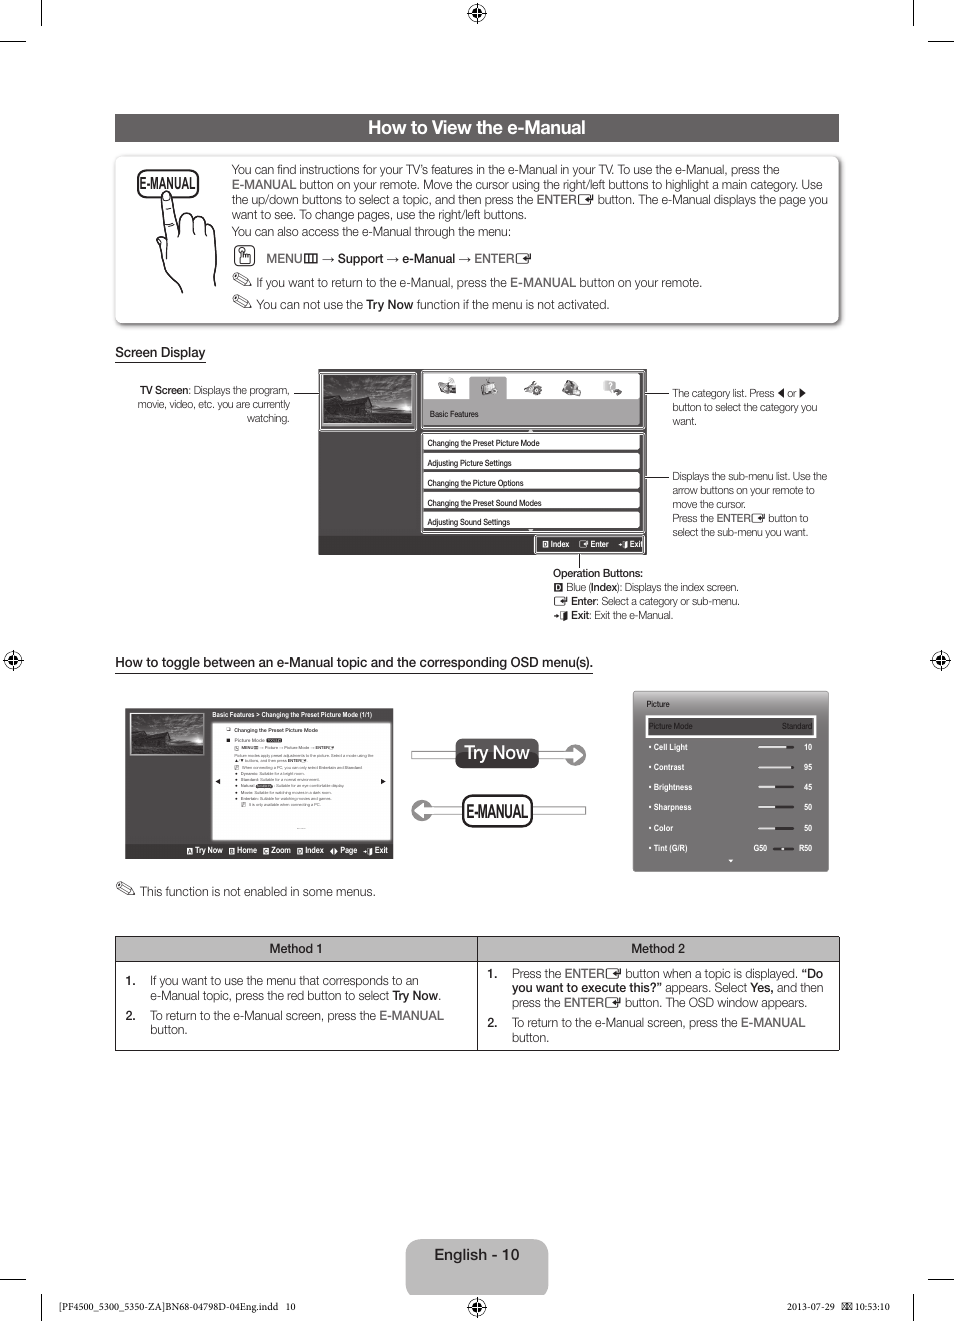 How to view the e-manual, E-manual try now, E-manual | Samsung